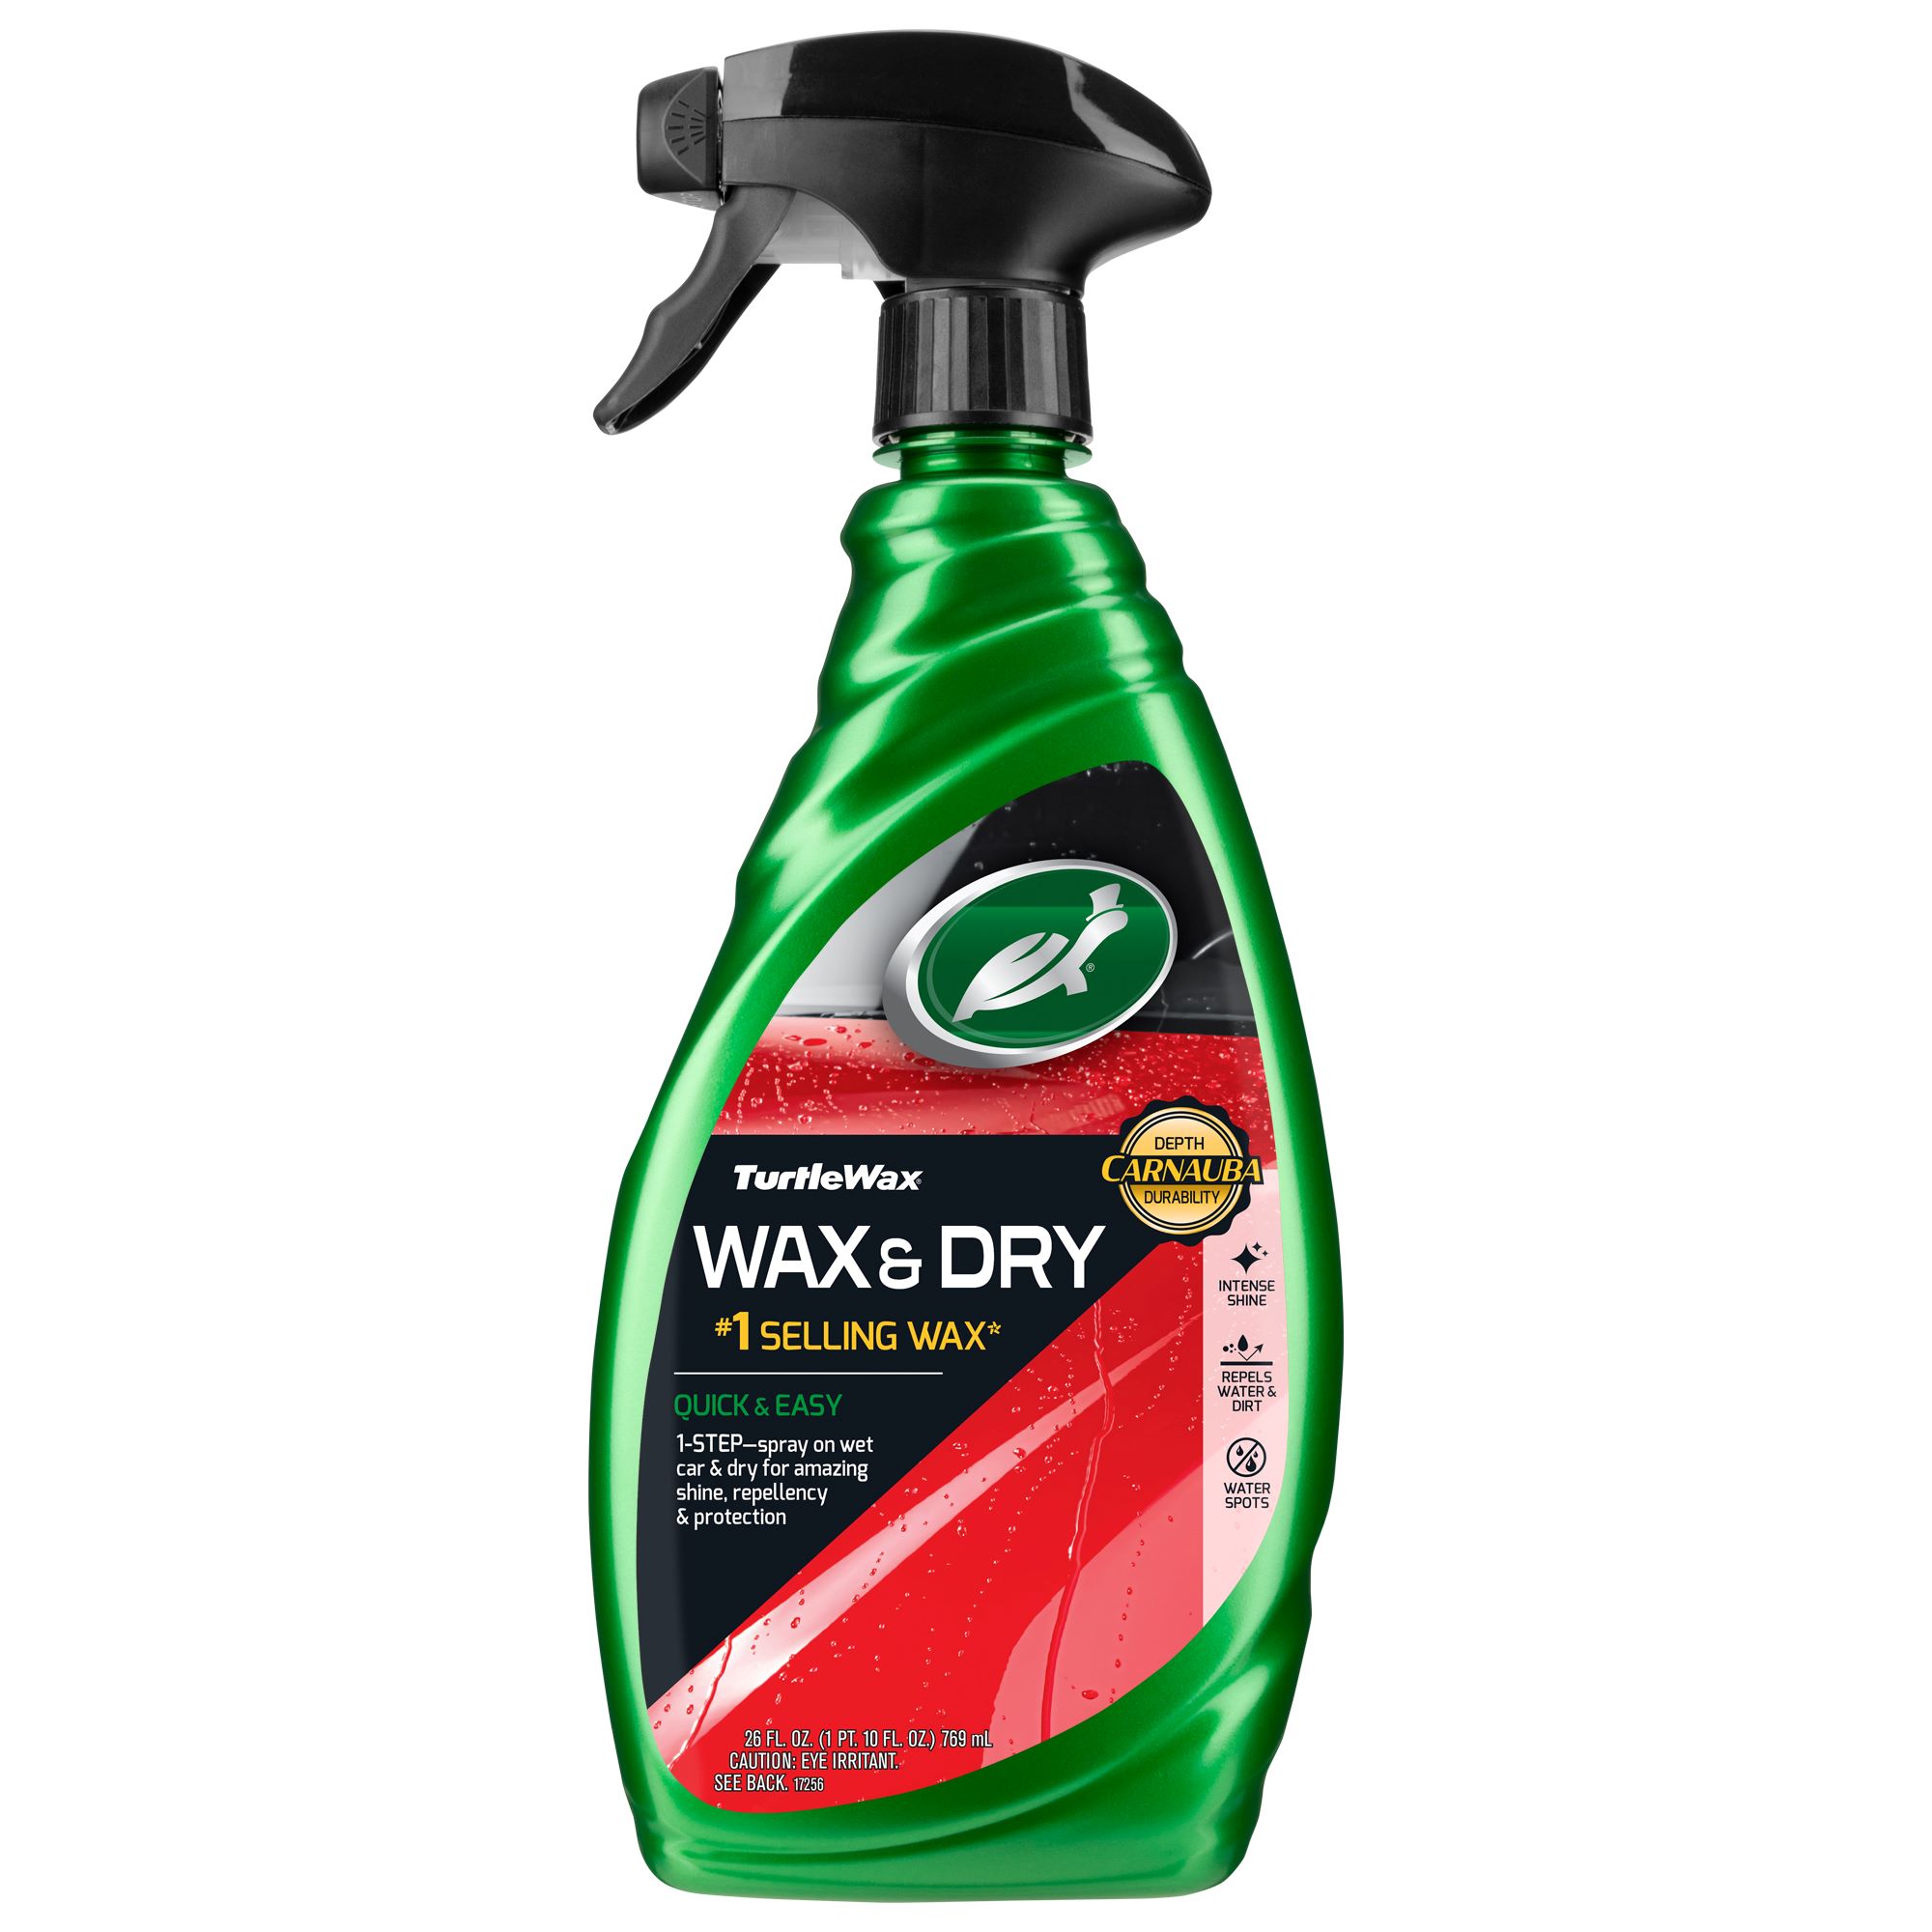 Turtle Wax Quick and Easy 1-Step Wax and Dry Spray Wax, 26 oz - image 1 of 9